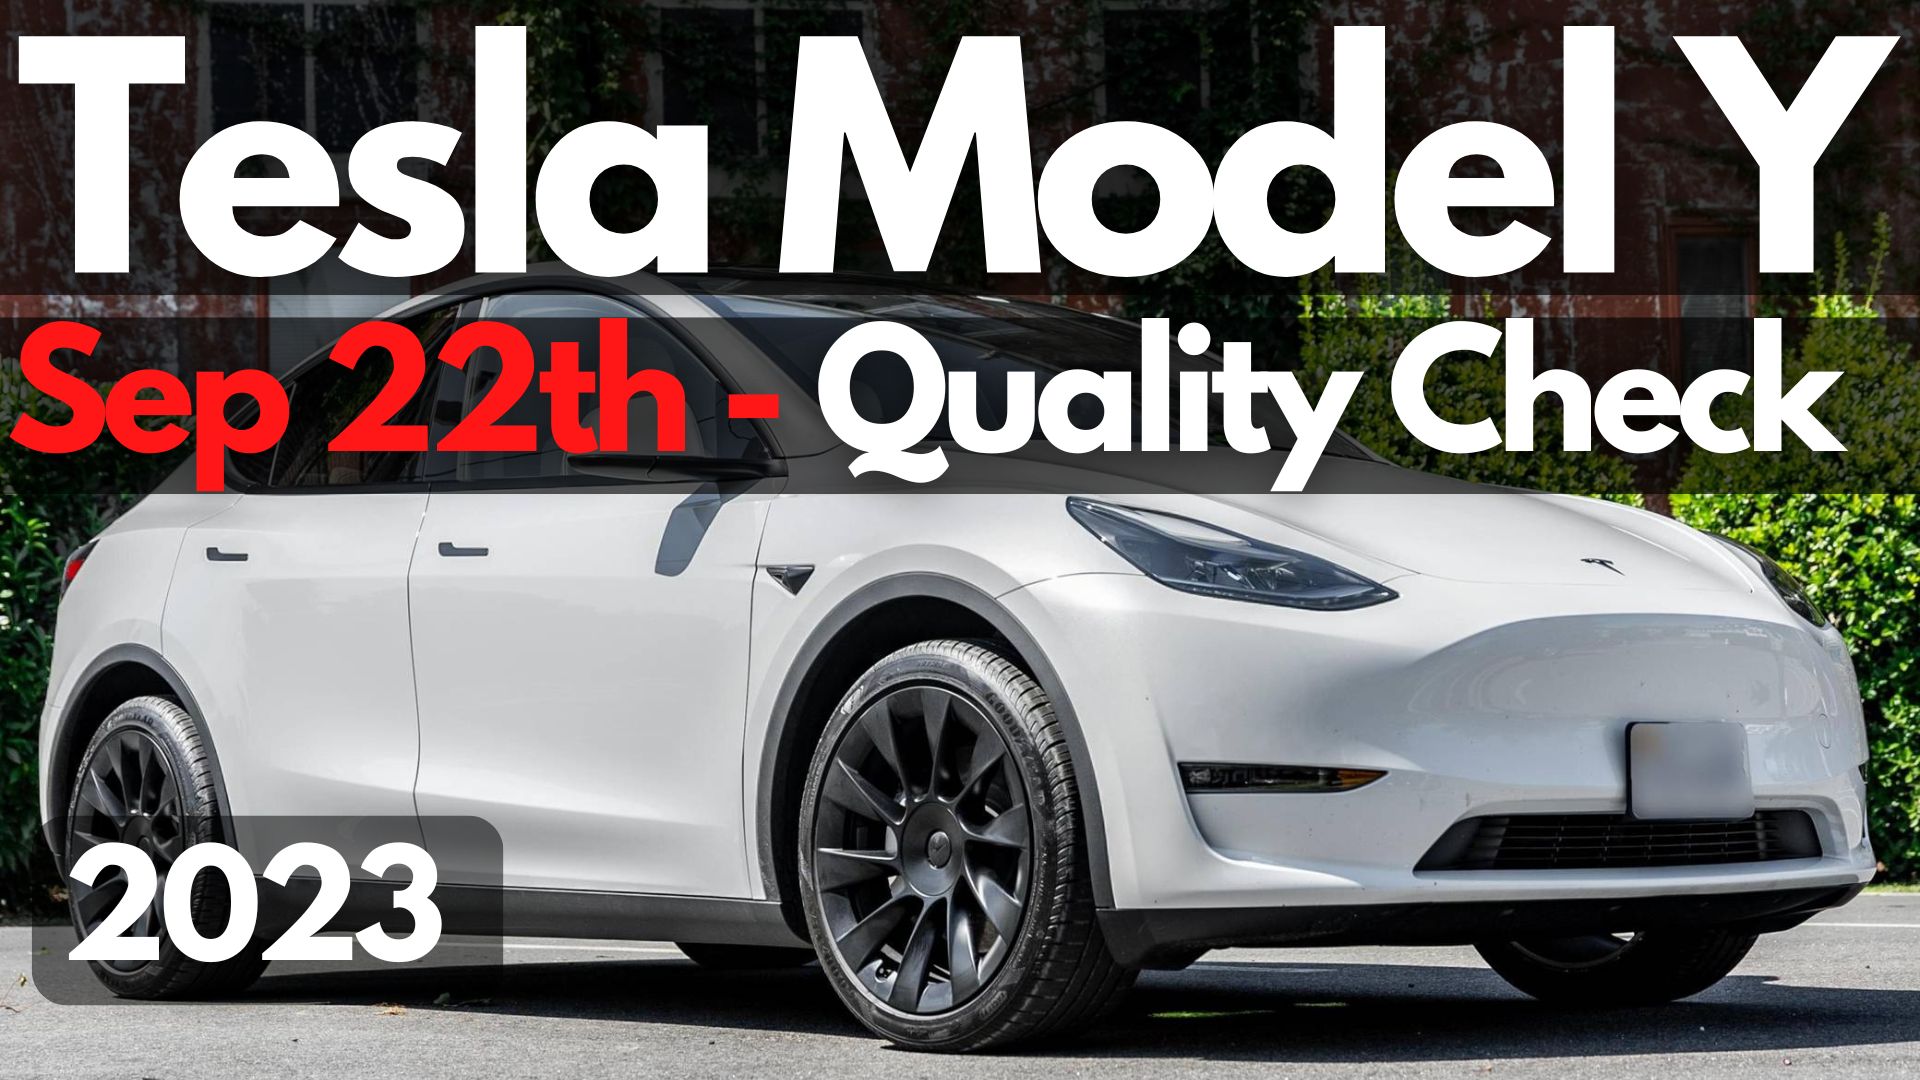 Has Tesla Improved The Model Y Build Quality For Sep 22, 2023?